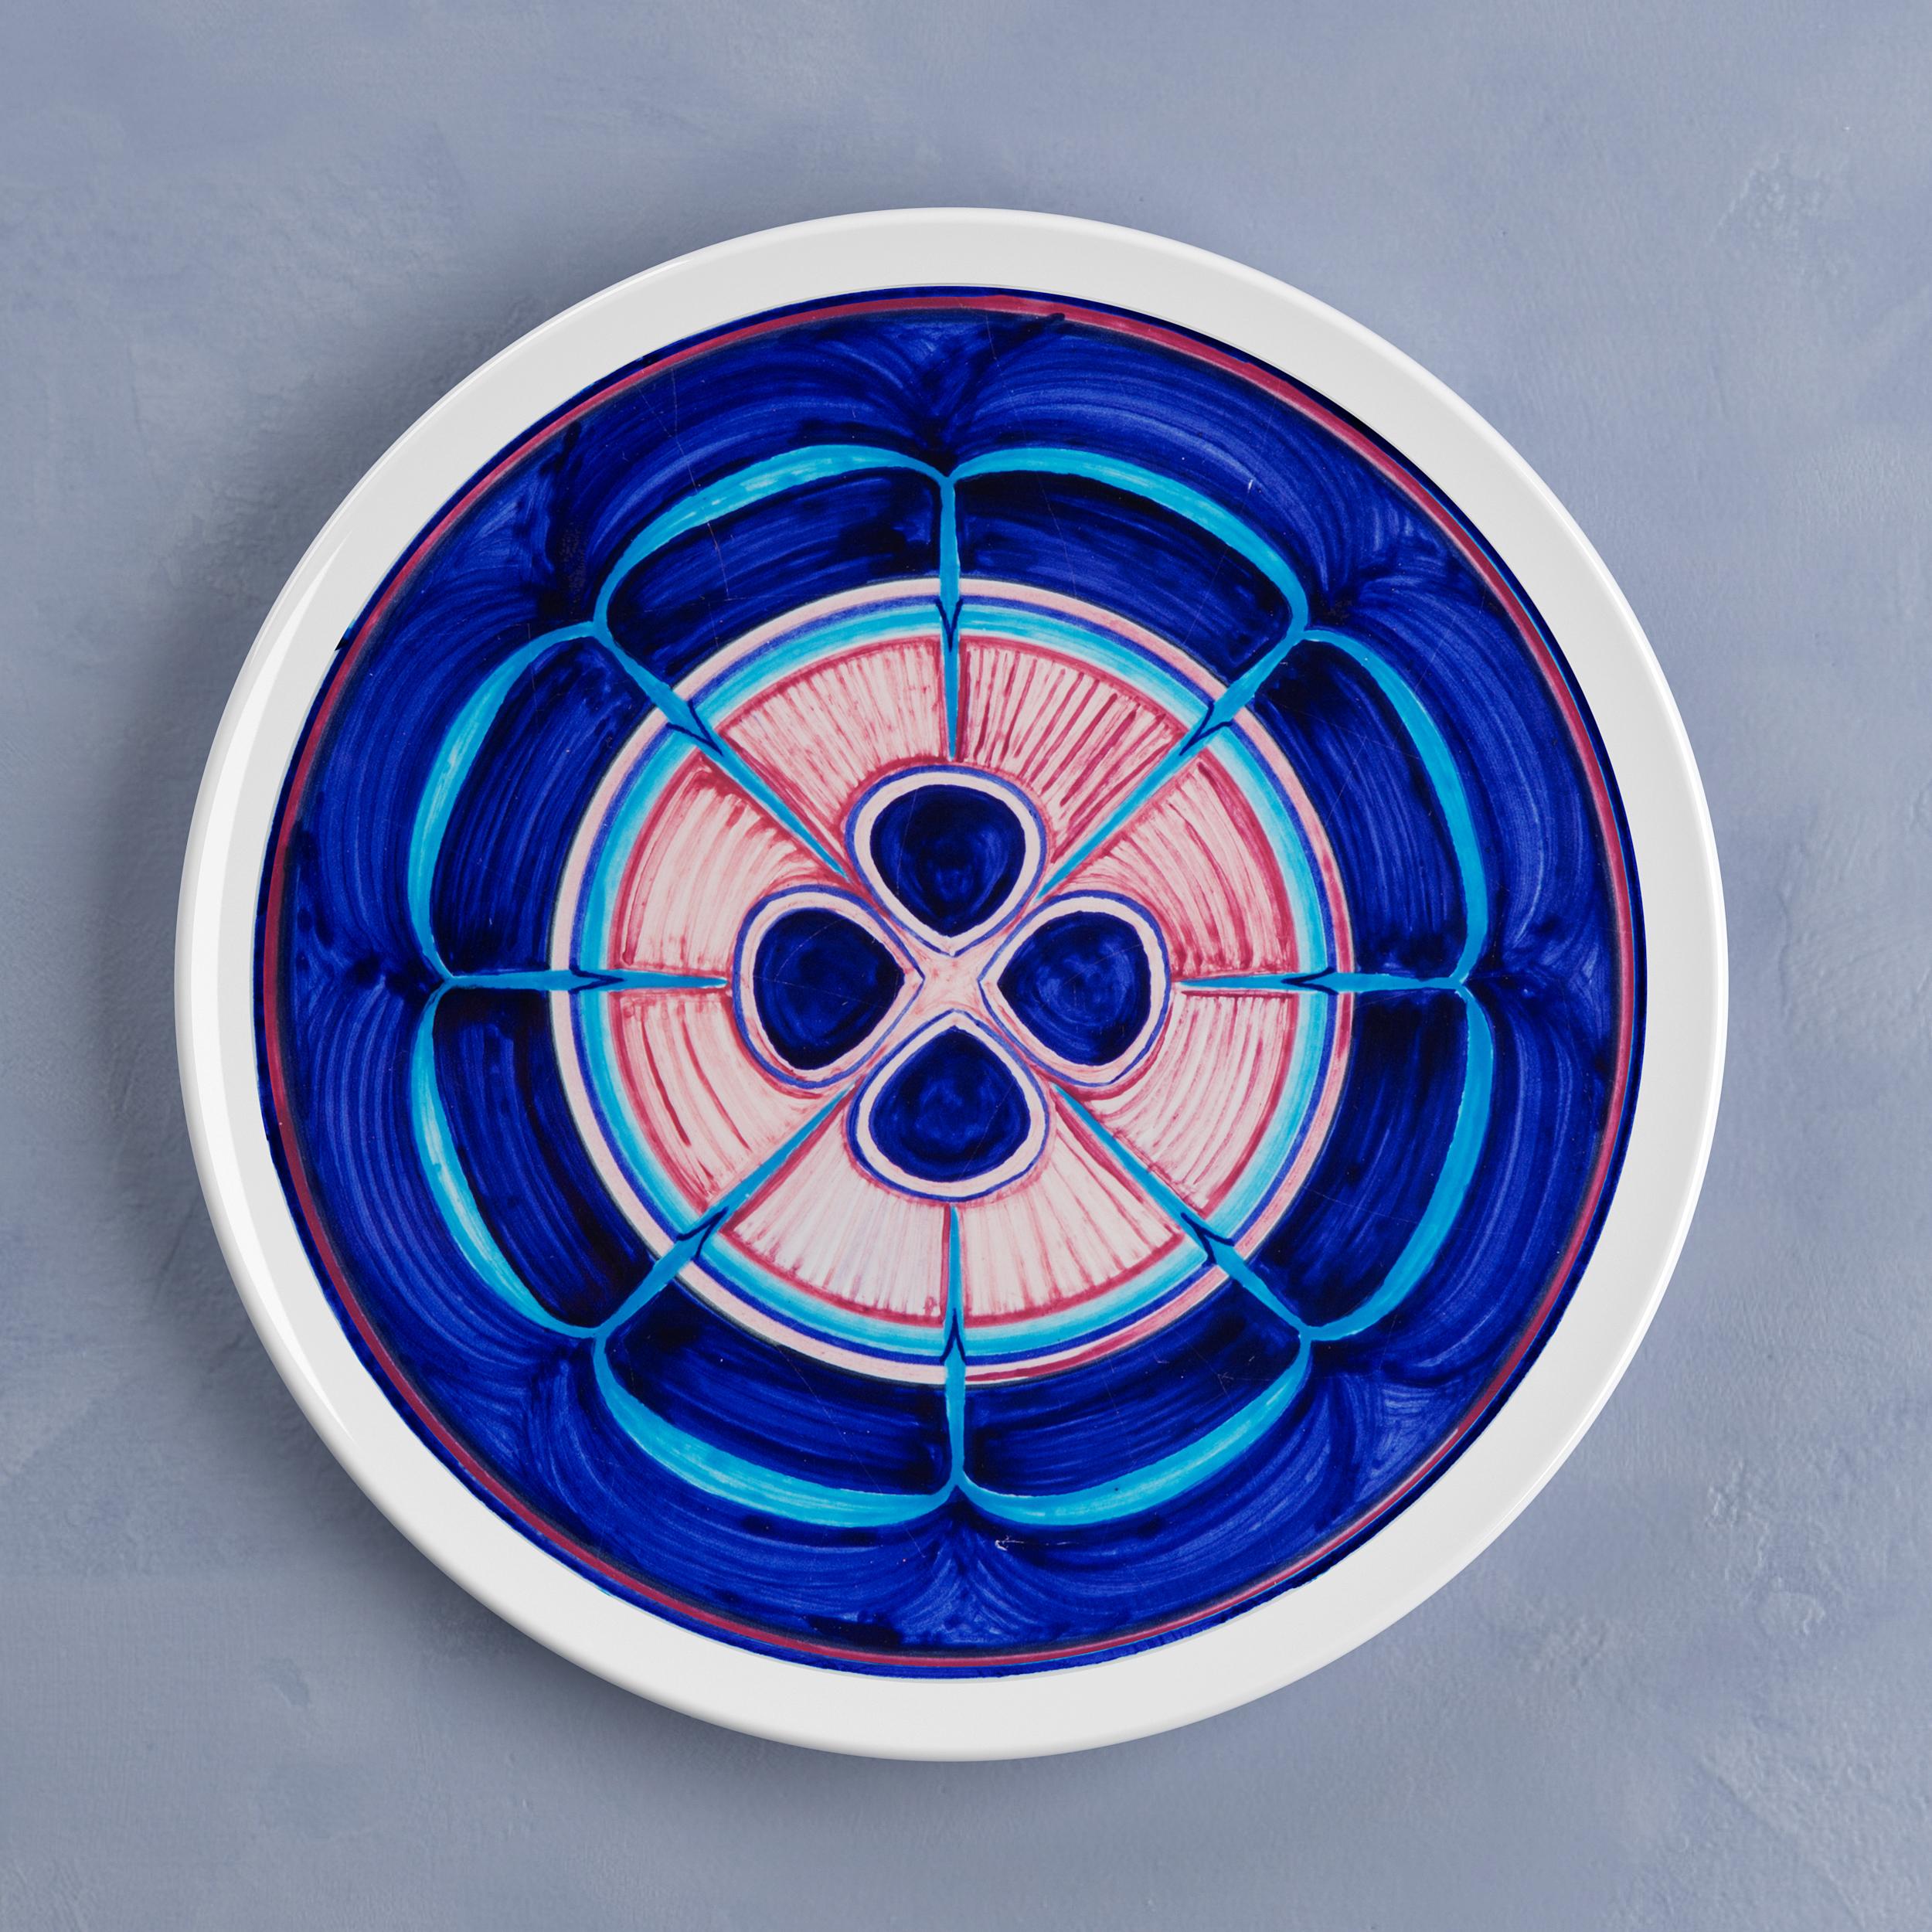 Beautiful handcrafted dinner plate by Crisodora will make an elegant statement with sophisticated Art de la table for every occasion.

Sicilian clay, hand painted.

Made in Sicily (Italy) by Master Artisans.